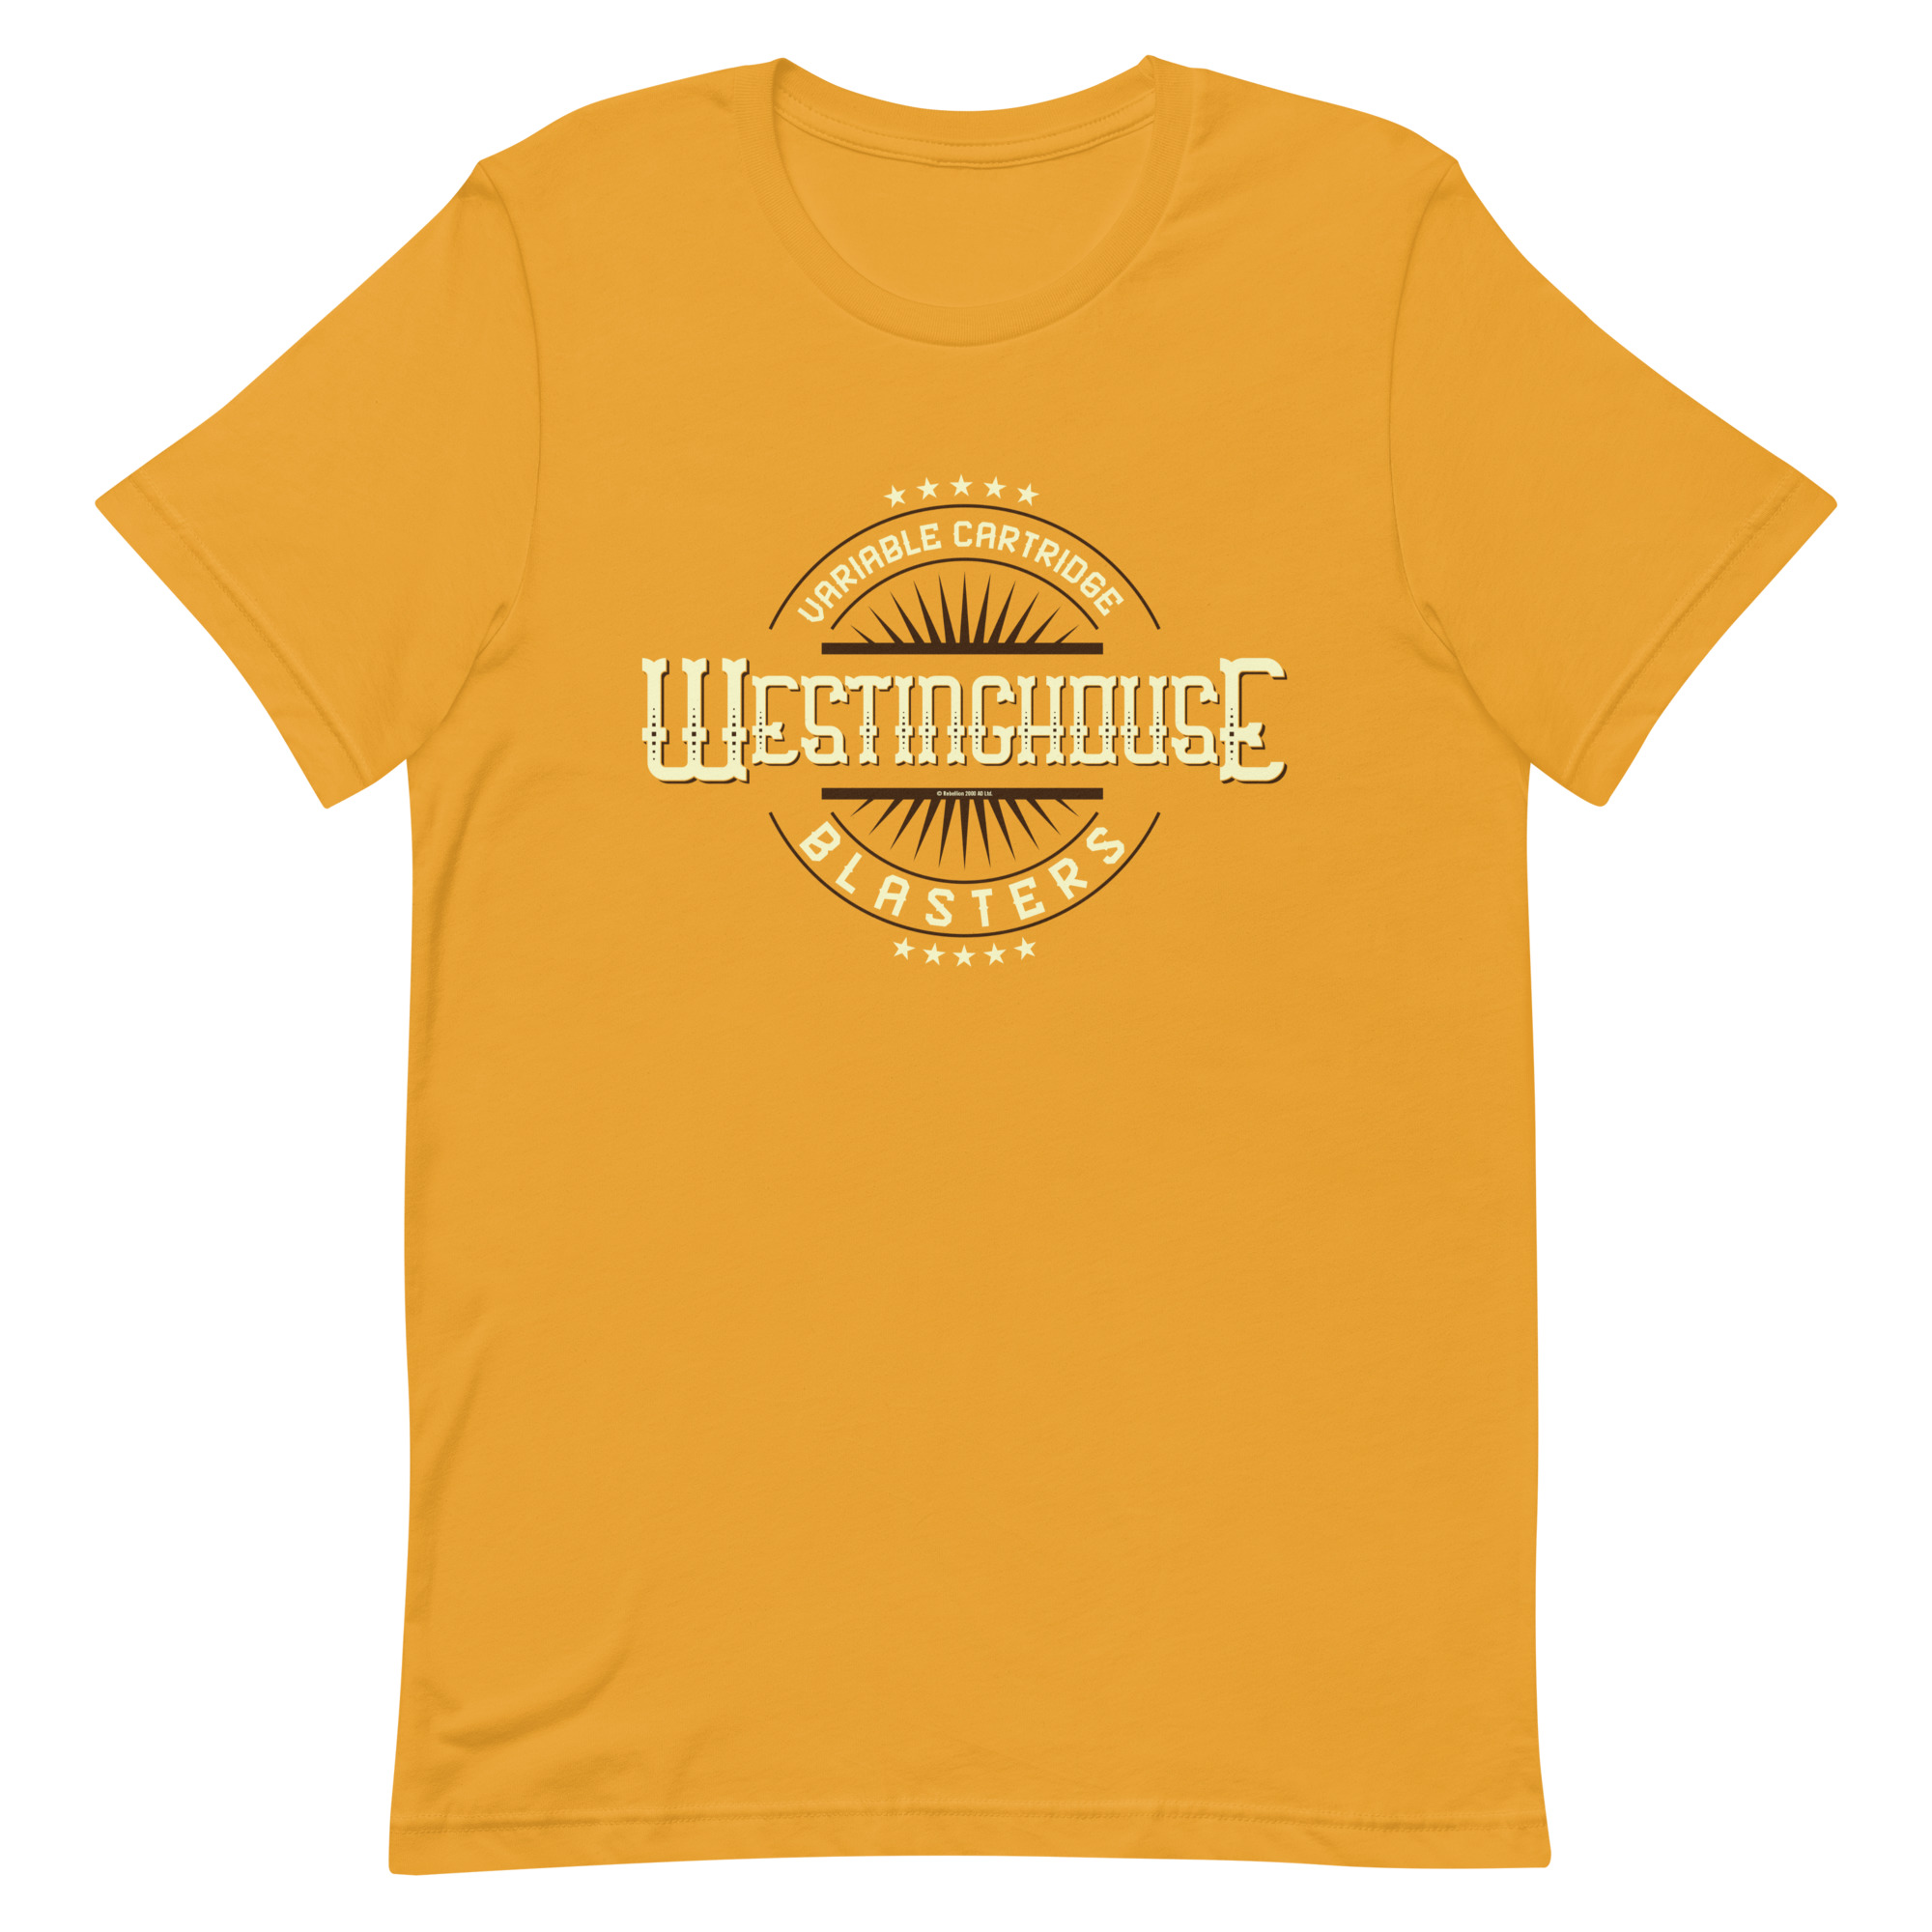 Golden yellow Tshirt with a logo that reads 